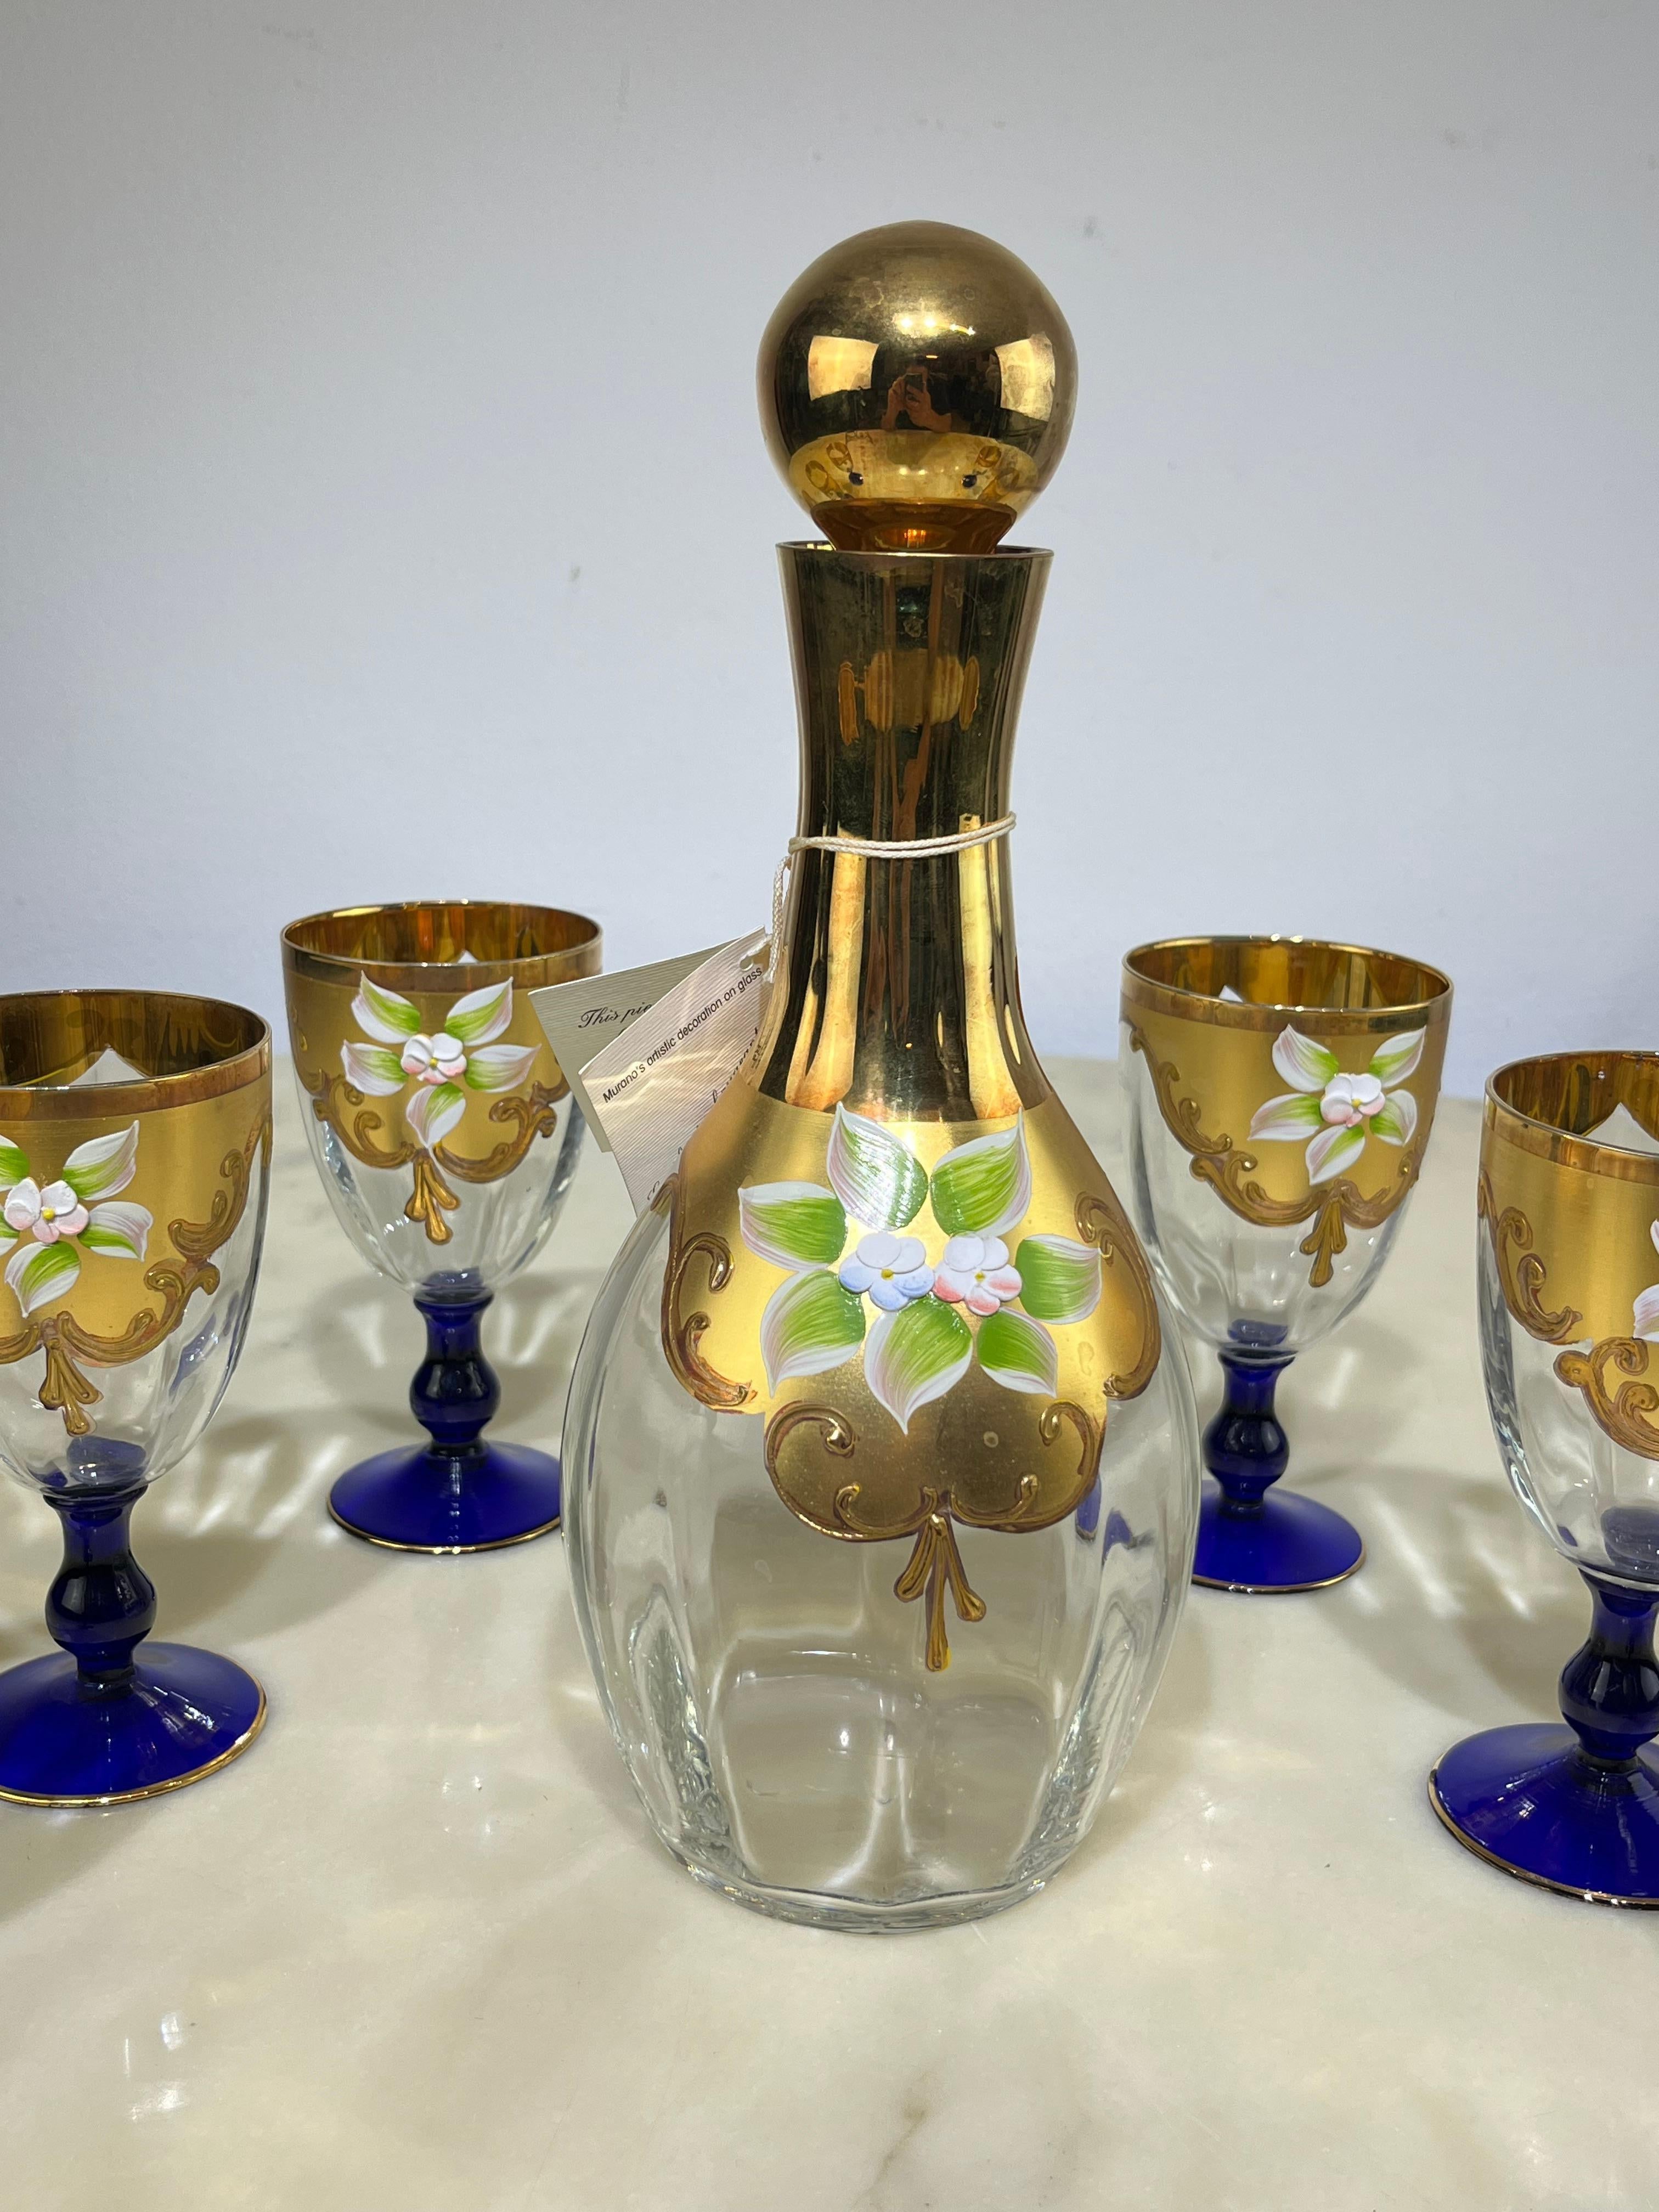 Set of bottle and six glasses in hand-painted Murano glass in 24kt gold, Italy, 1970s
Wedding gift from my grandparents, work of Venetian masters. The bottle is 28 cm high and has a diameter of 11 cm. The glasses are 14 cm high and have a diameter